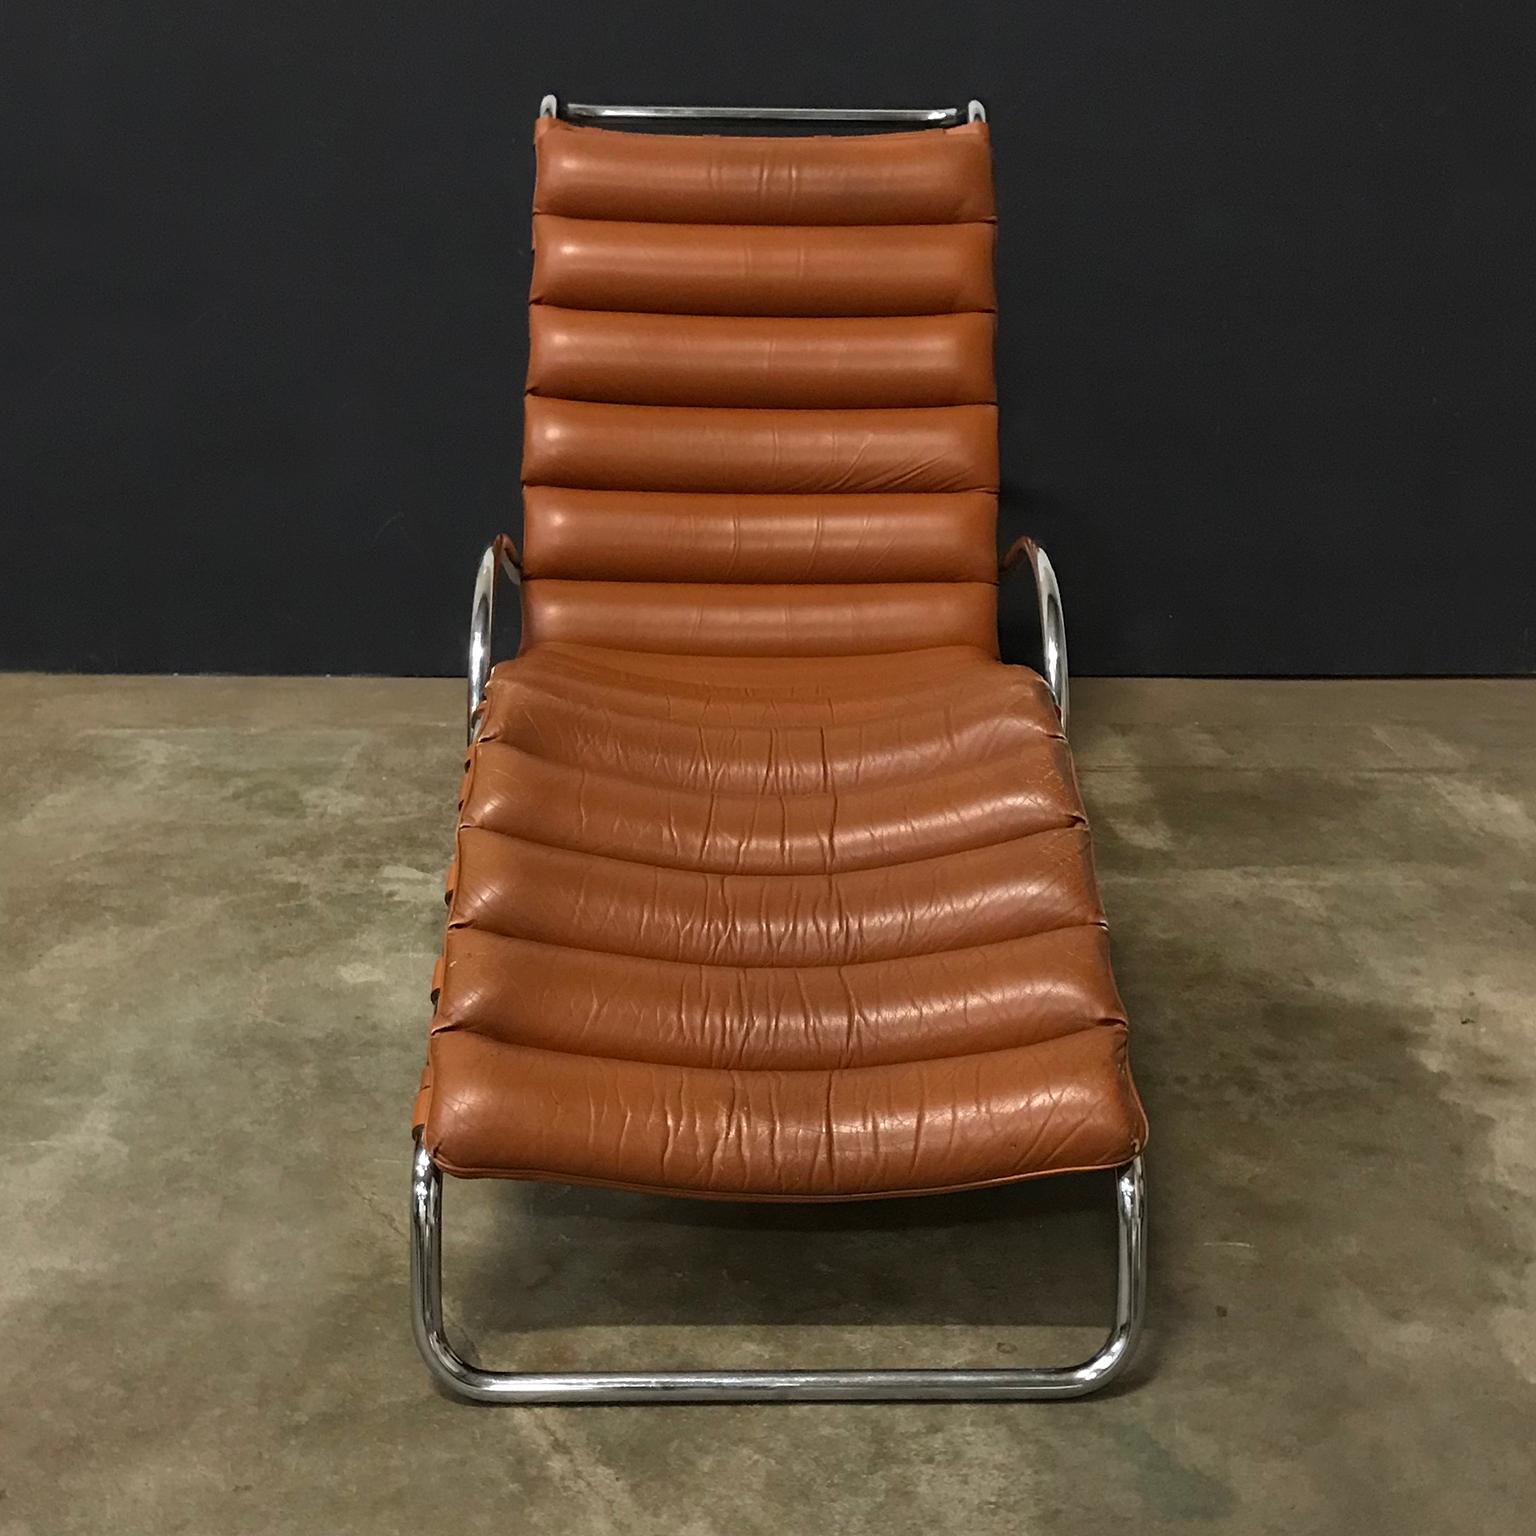 Leather 1965, Ludwig Mies van der Rohe, Rare Early Production Adjustable Chaise Longue